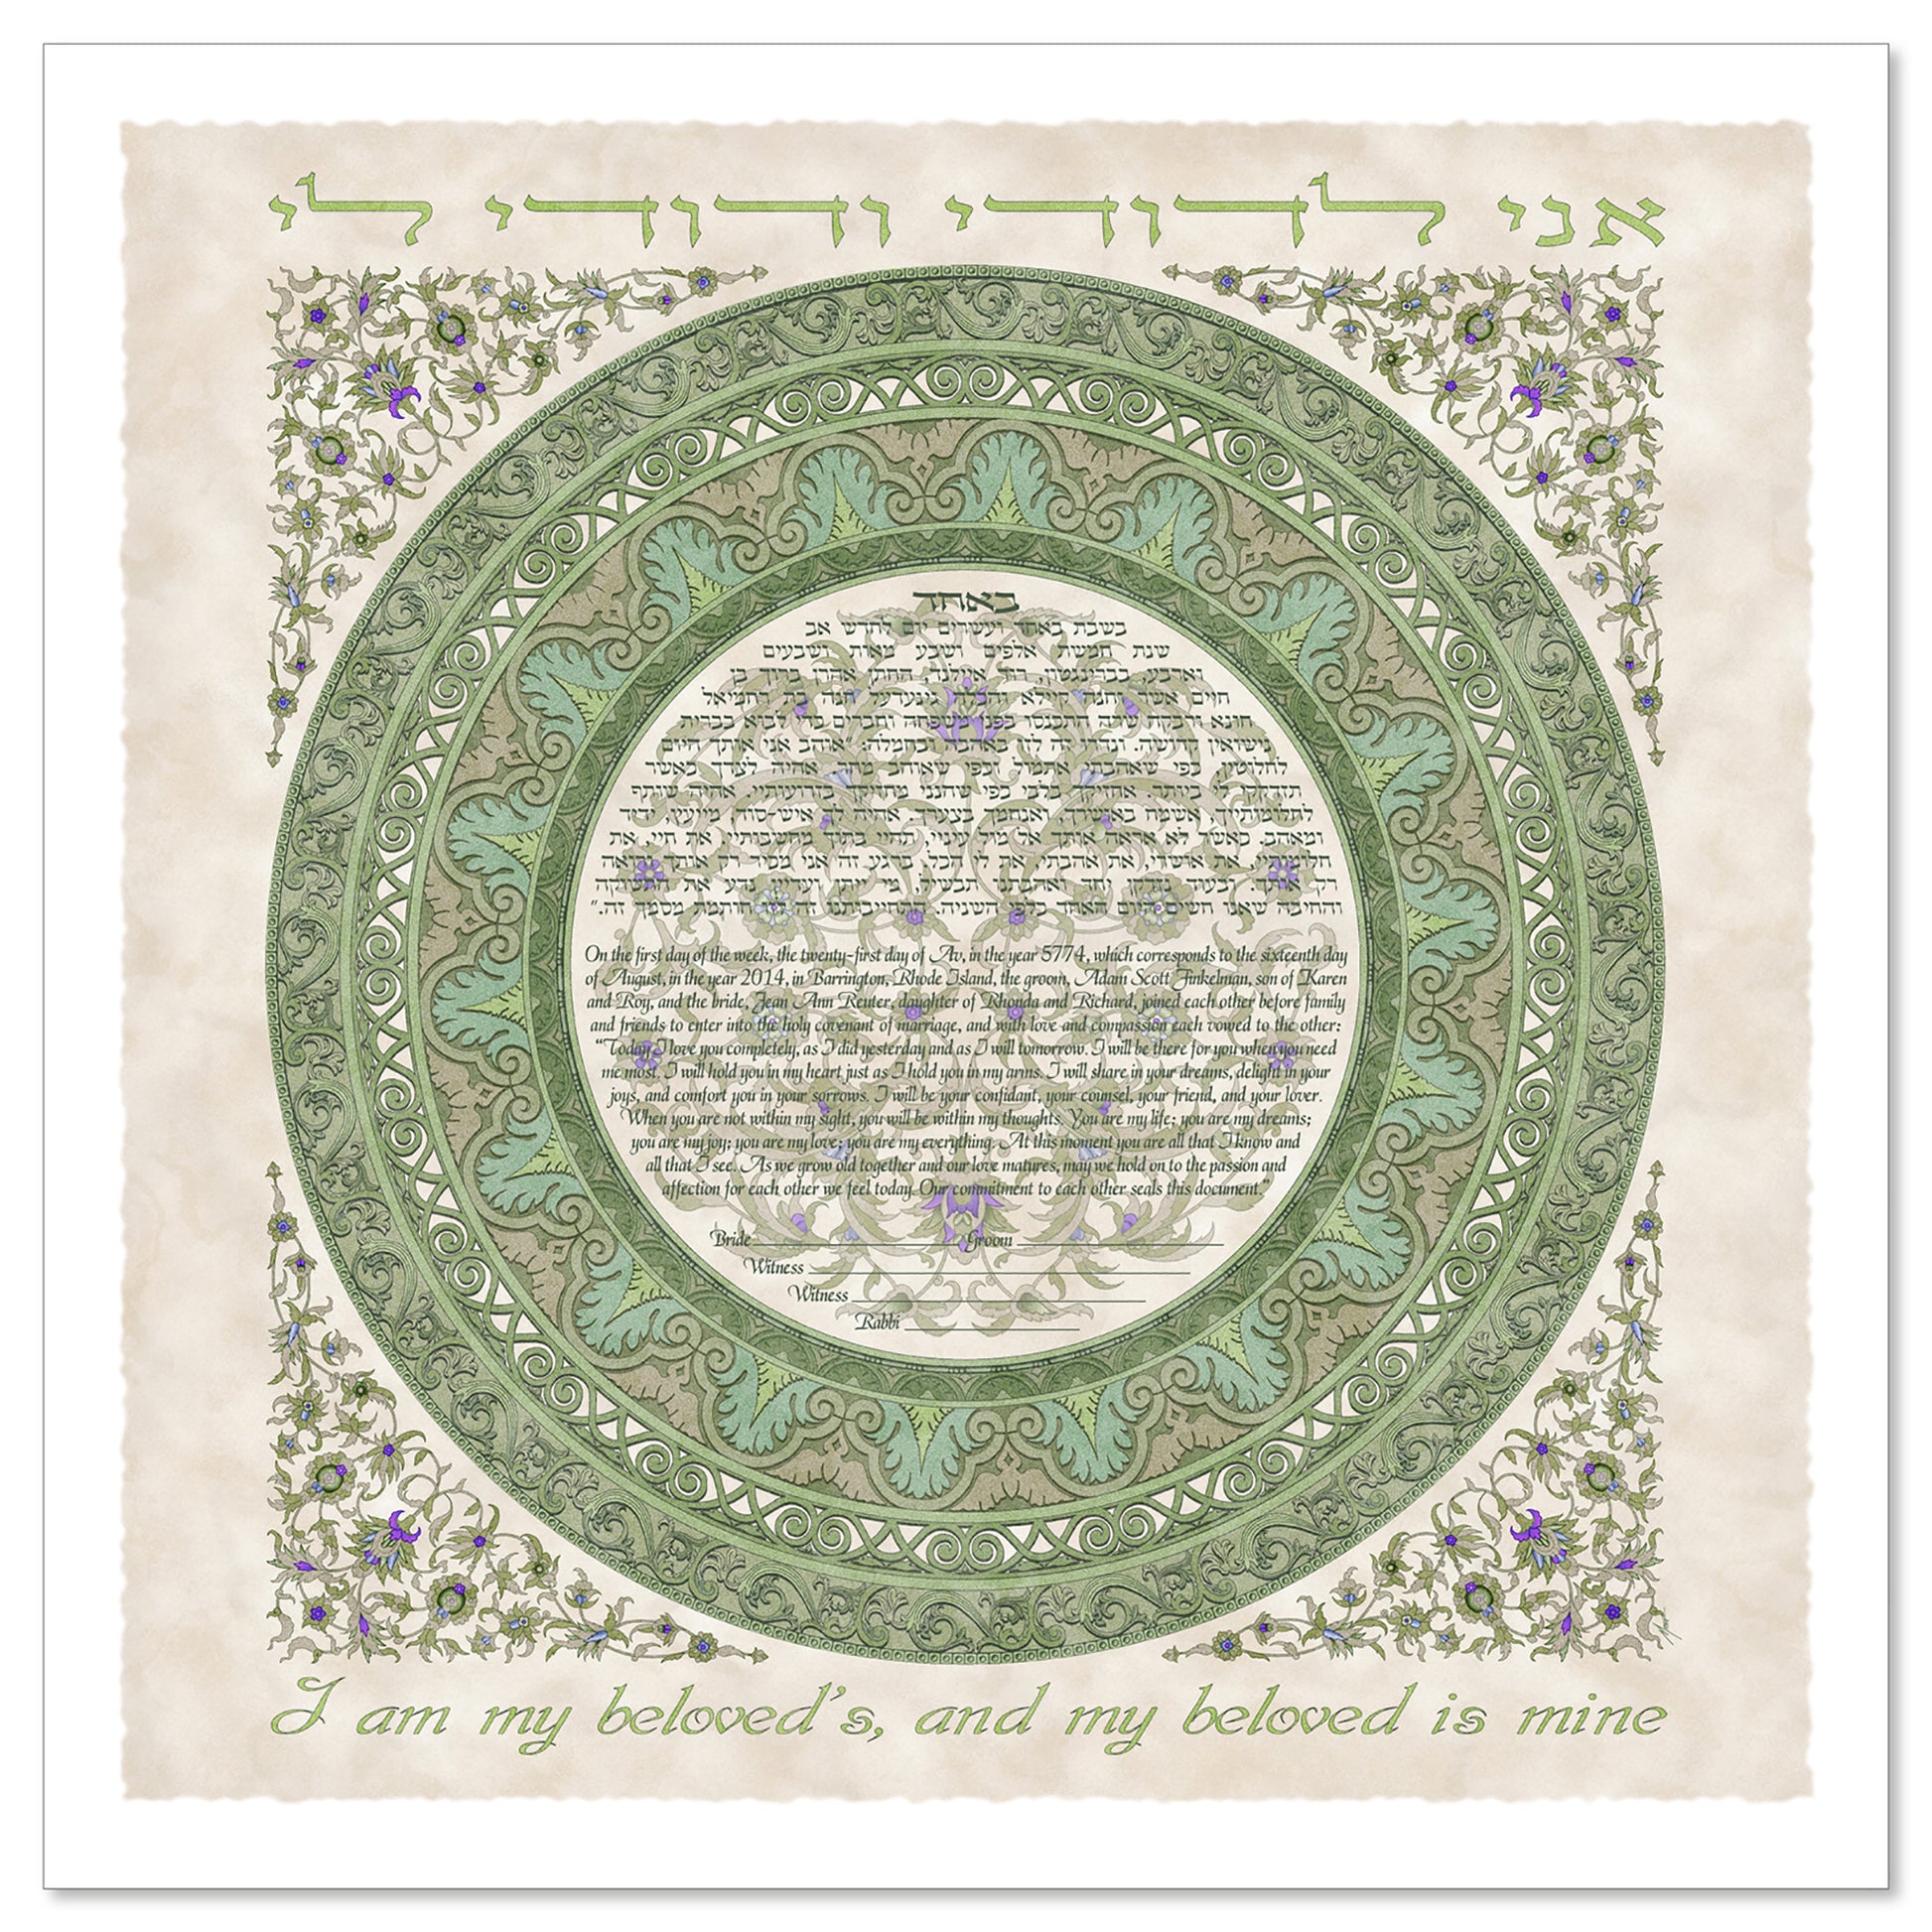 My Love's Ring 3 Green/Parchment ketubah by Micah Parker with the phrase, "I am my beloved's, and my beloved is mine," in Hebrew and English featuring a circular text surrounded by a ring in shades of green on a parchment background.